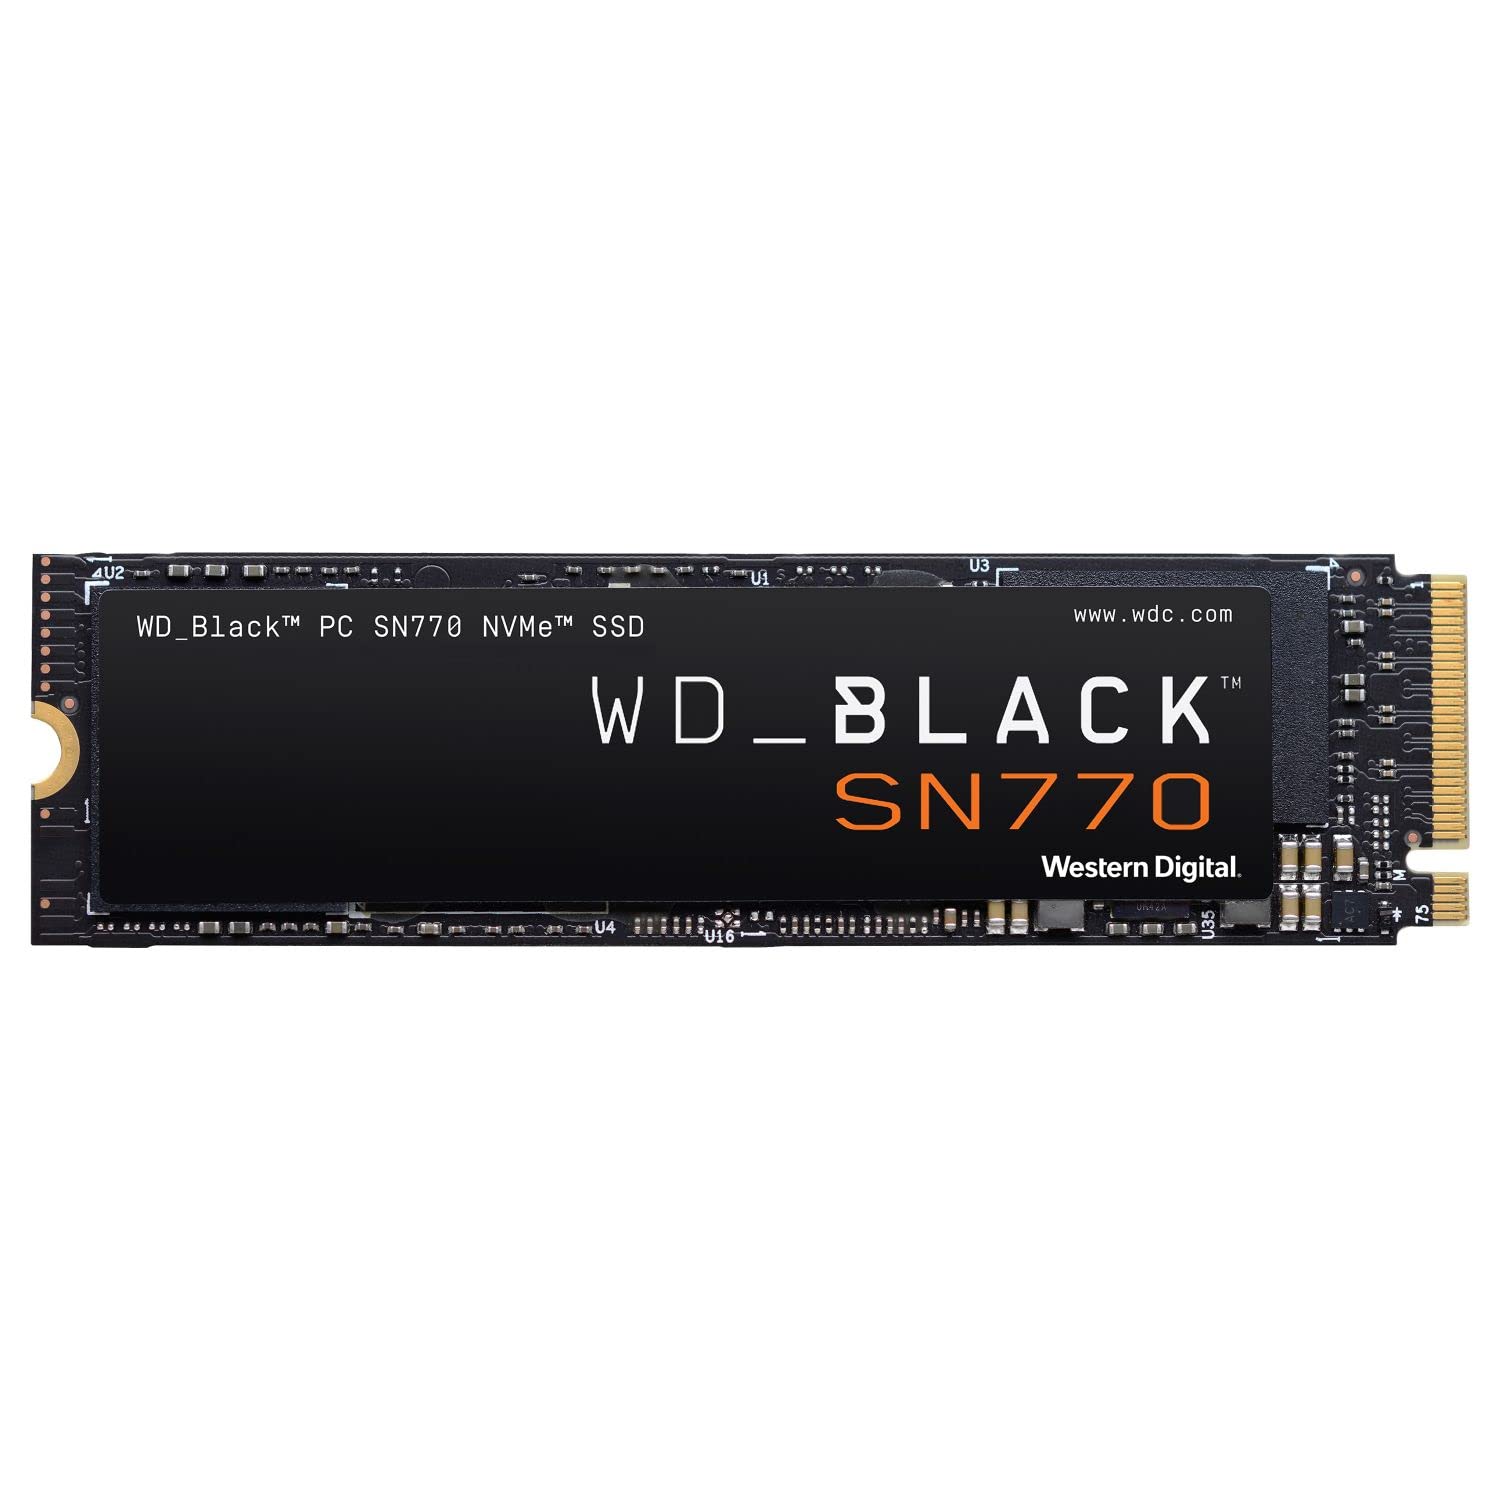 WD_BLACK 1TB SN770 NVMe Internal Gaming SSD Solid State Drive - Gen4 PCIe, M.2 2280, Up to 5,150 MB/s - WDS100T3X0E $52.99